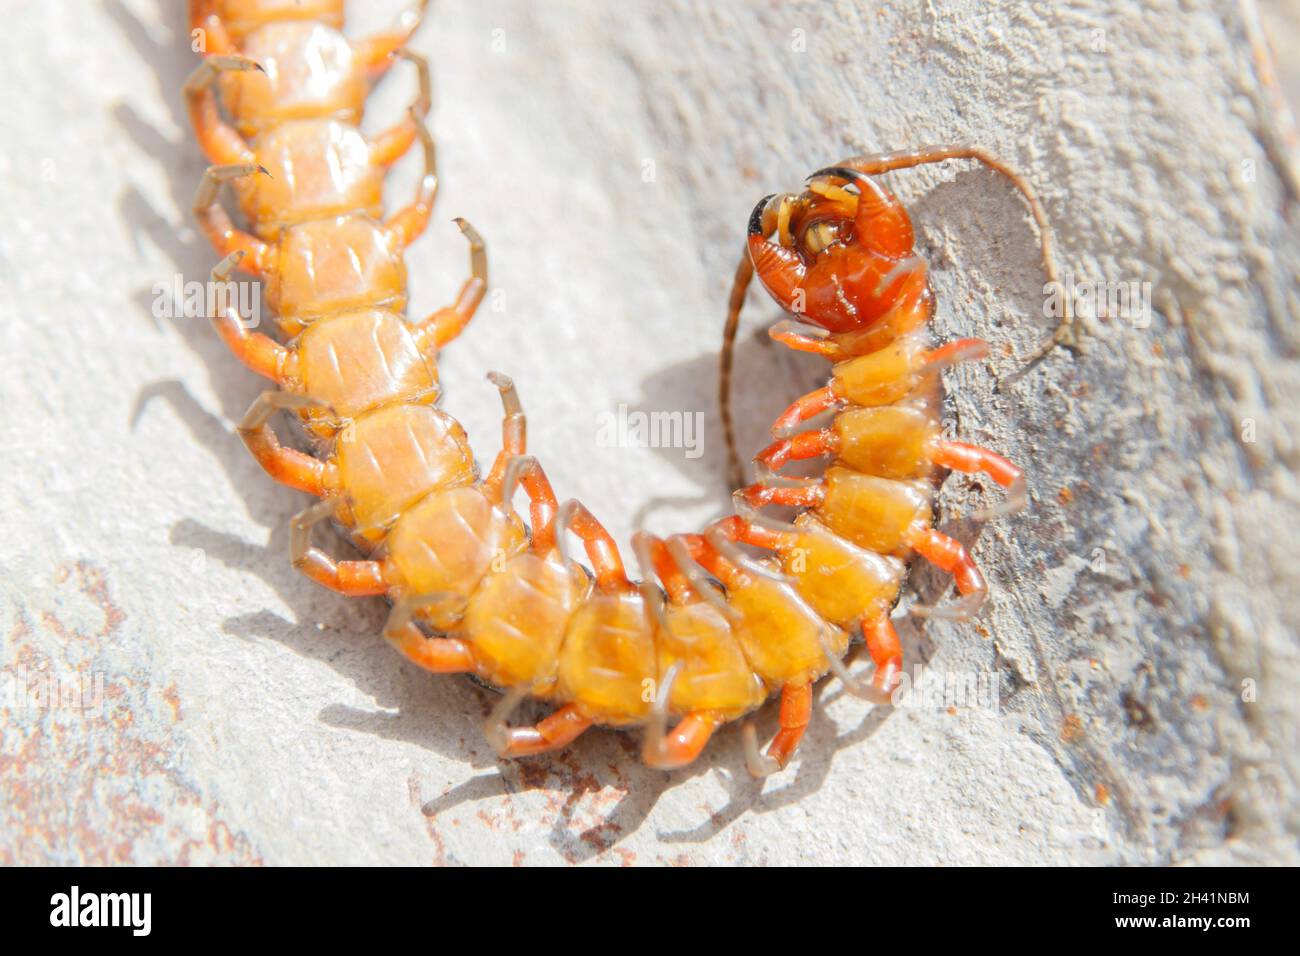 underside of a large centipede Stock Photo